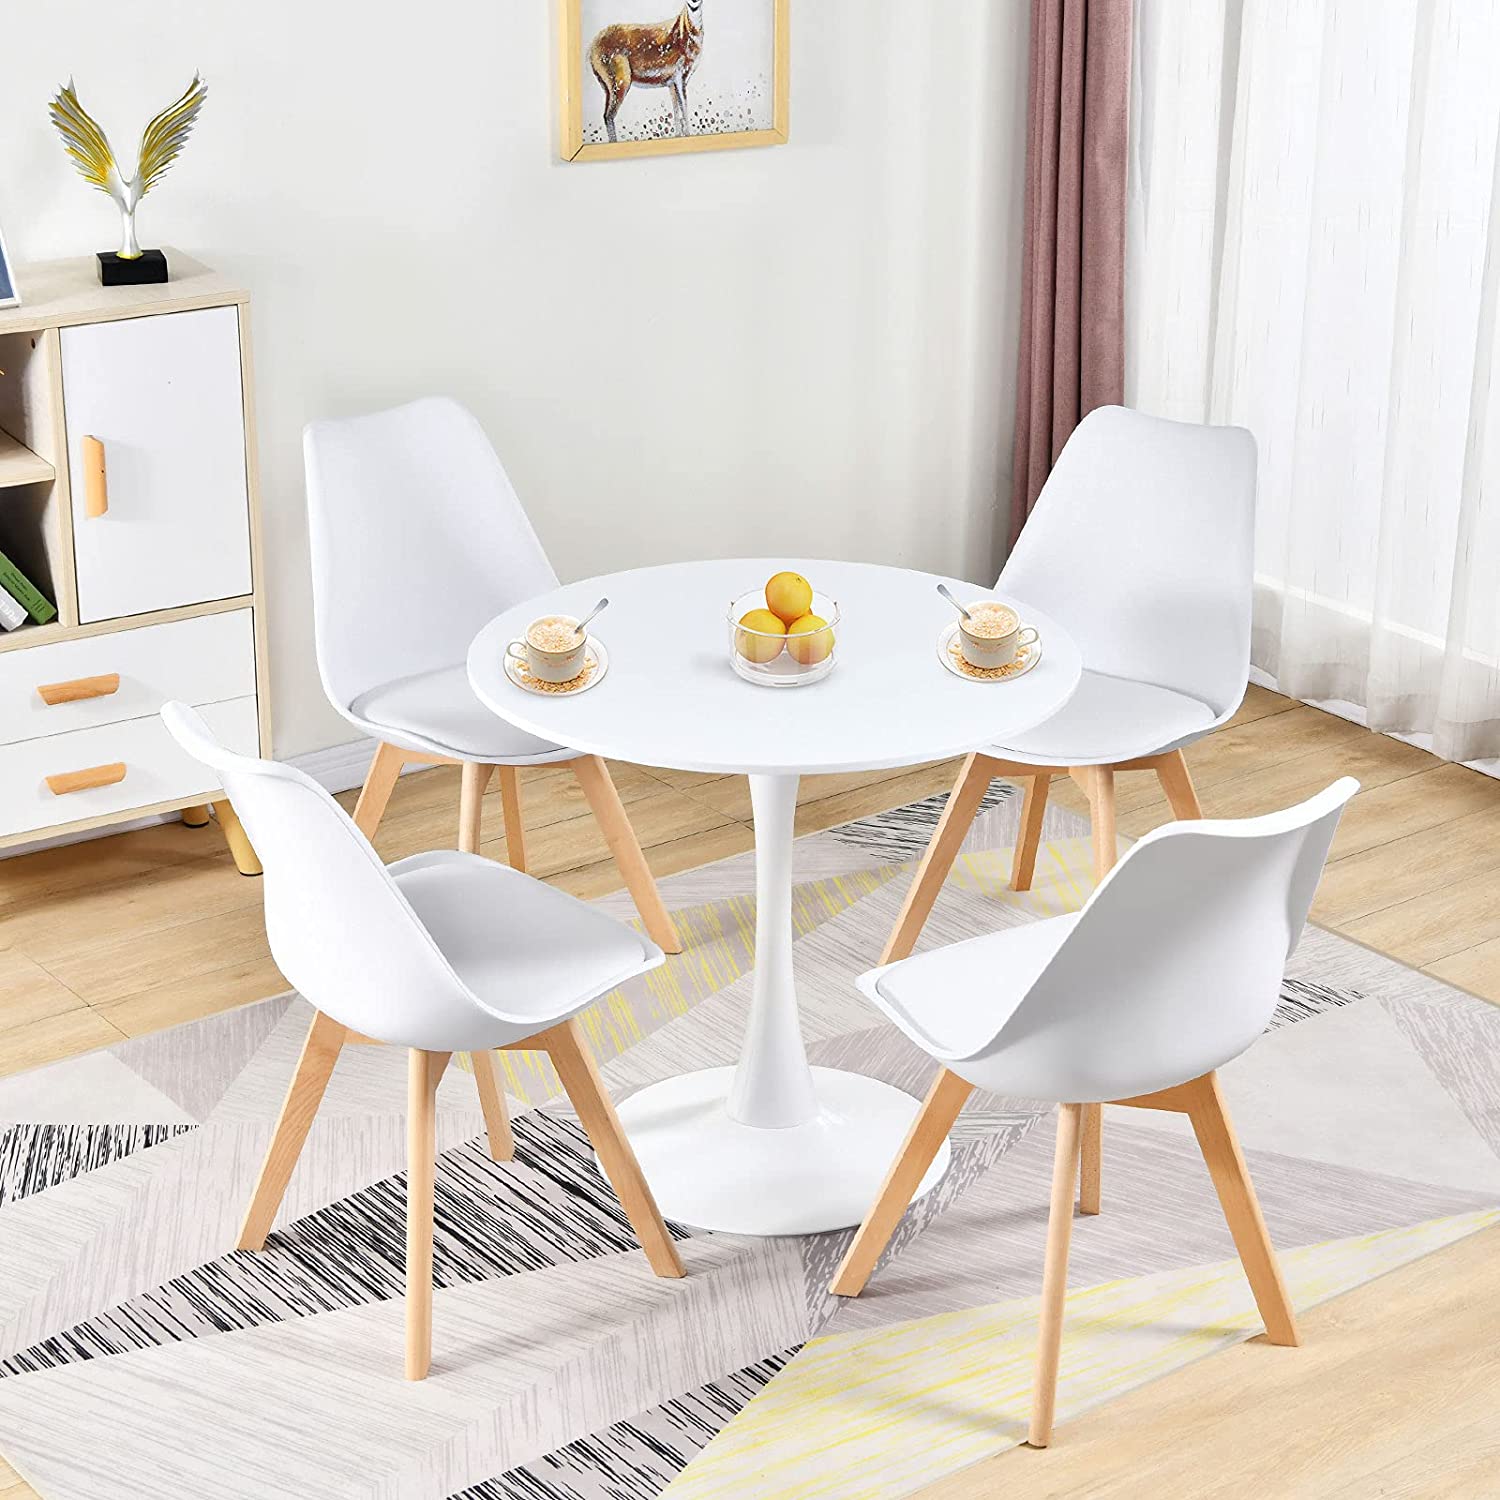 Tulip 4 Seater Round Dining Table and Chair set | HOG- Home. Office. Garden online marketplace